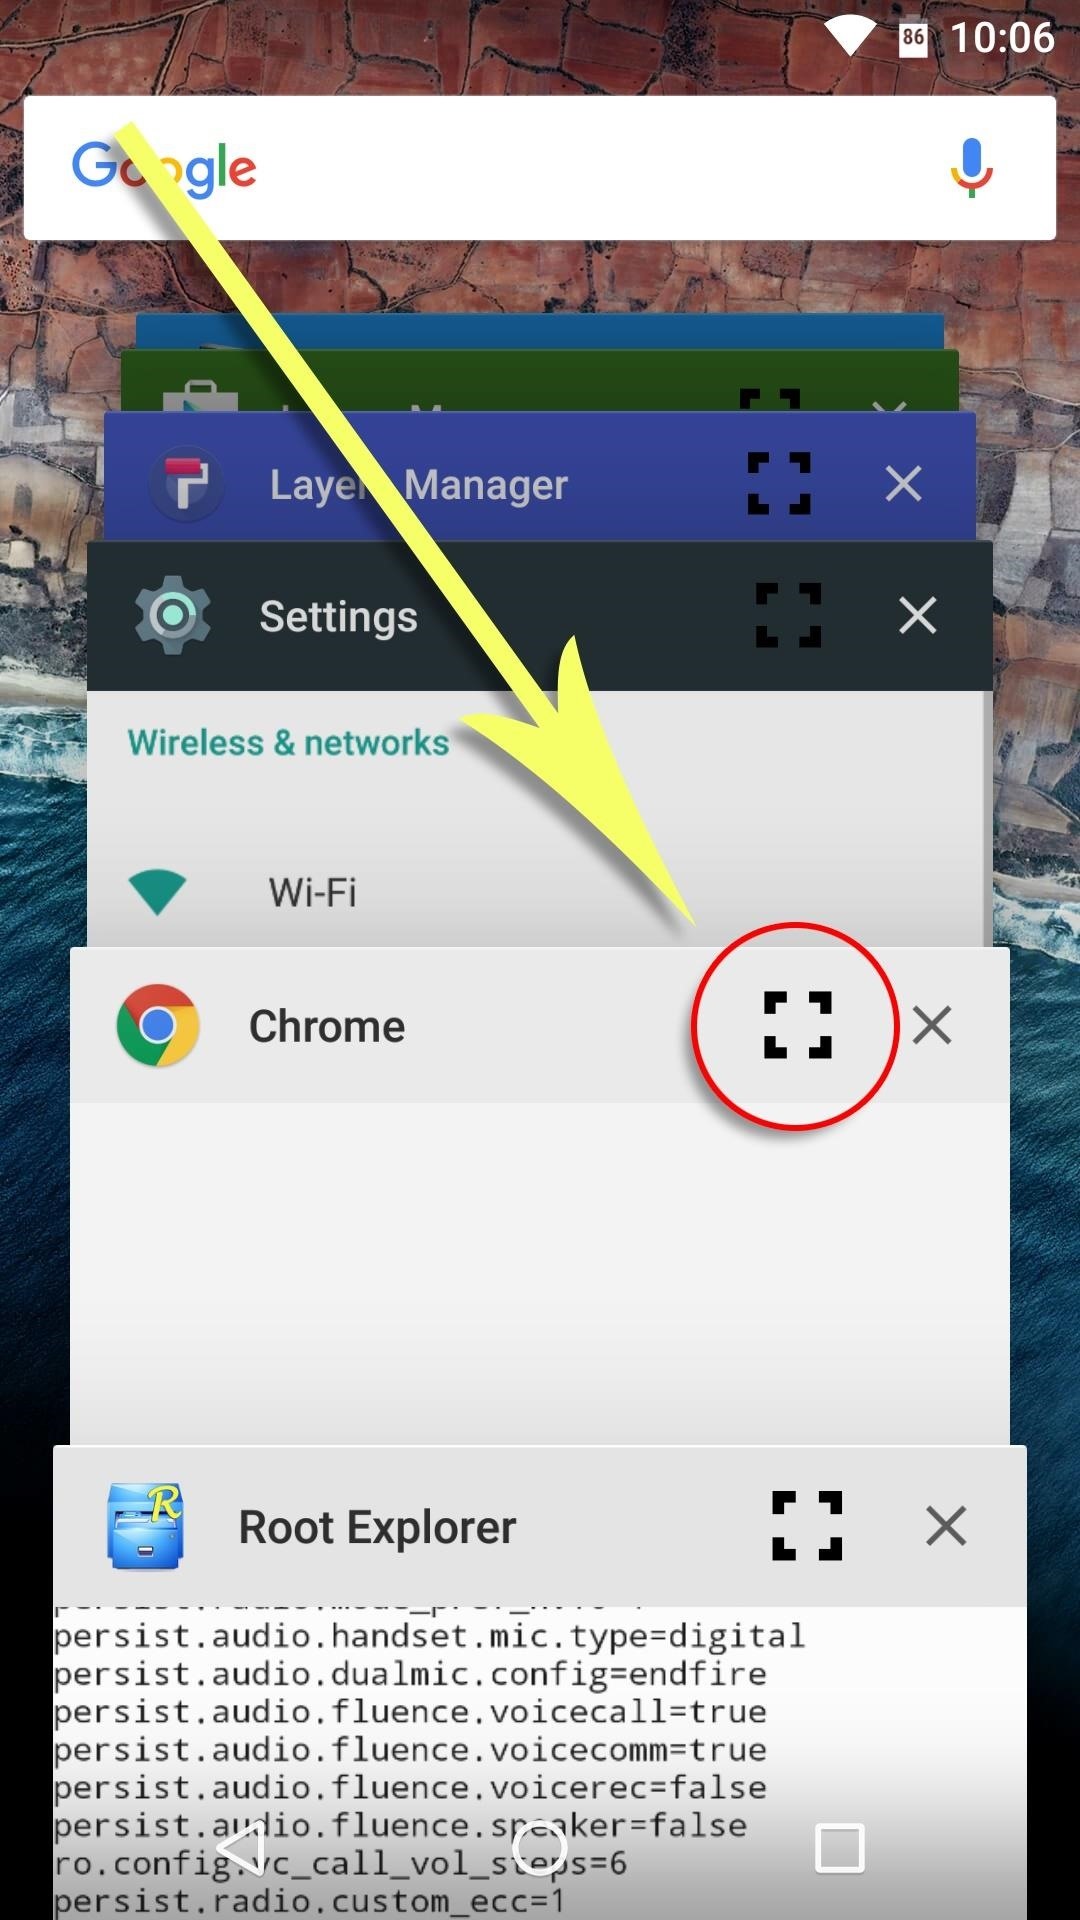 How to Unlock the Hidden Multi-Window Mode in Android 6.0 Marshmallow